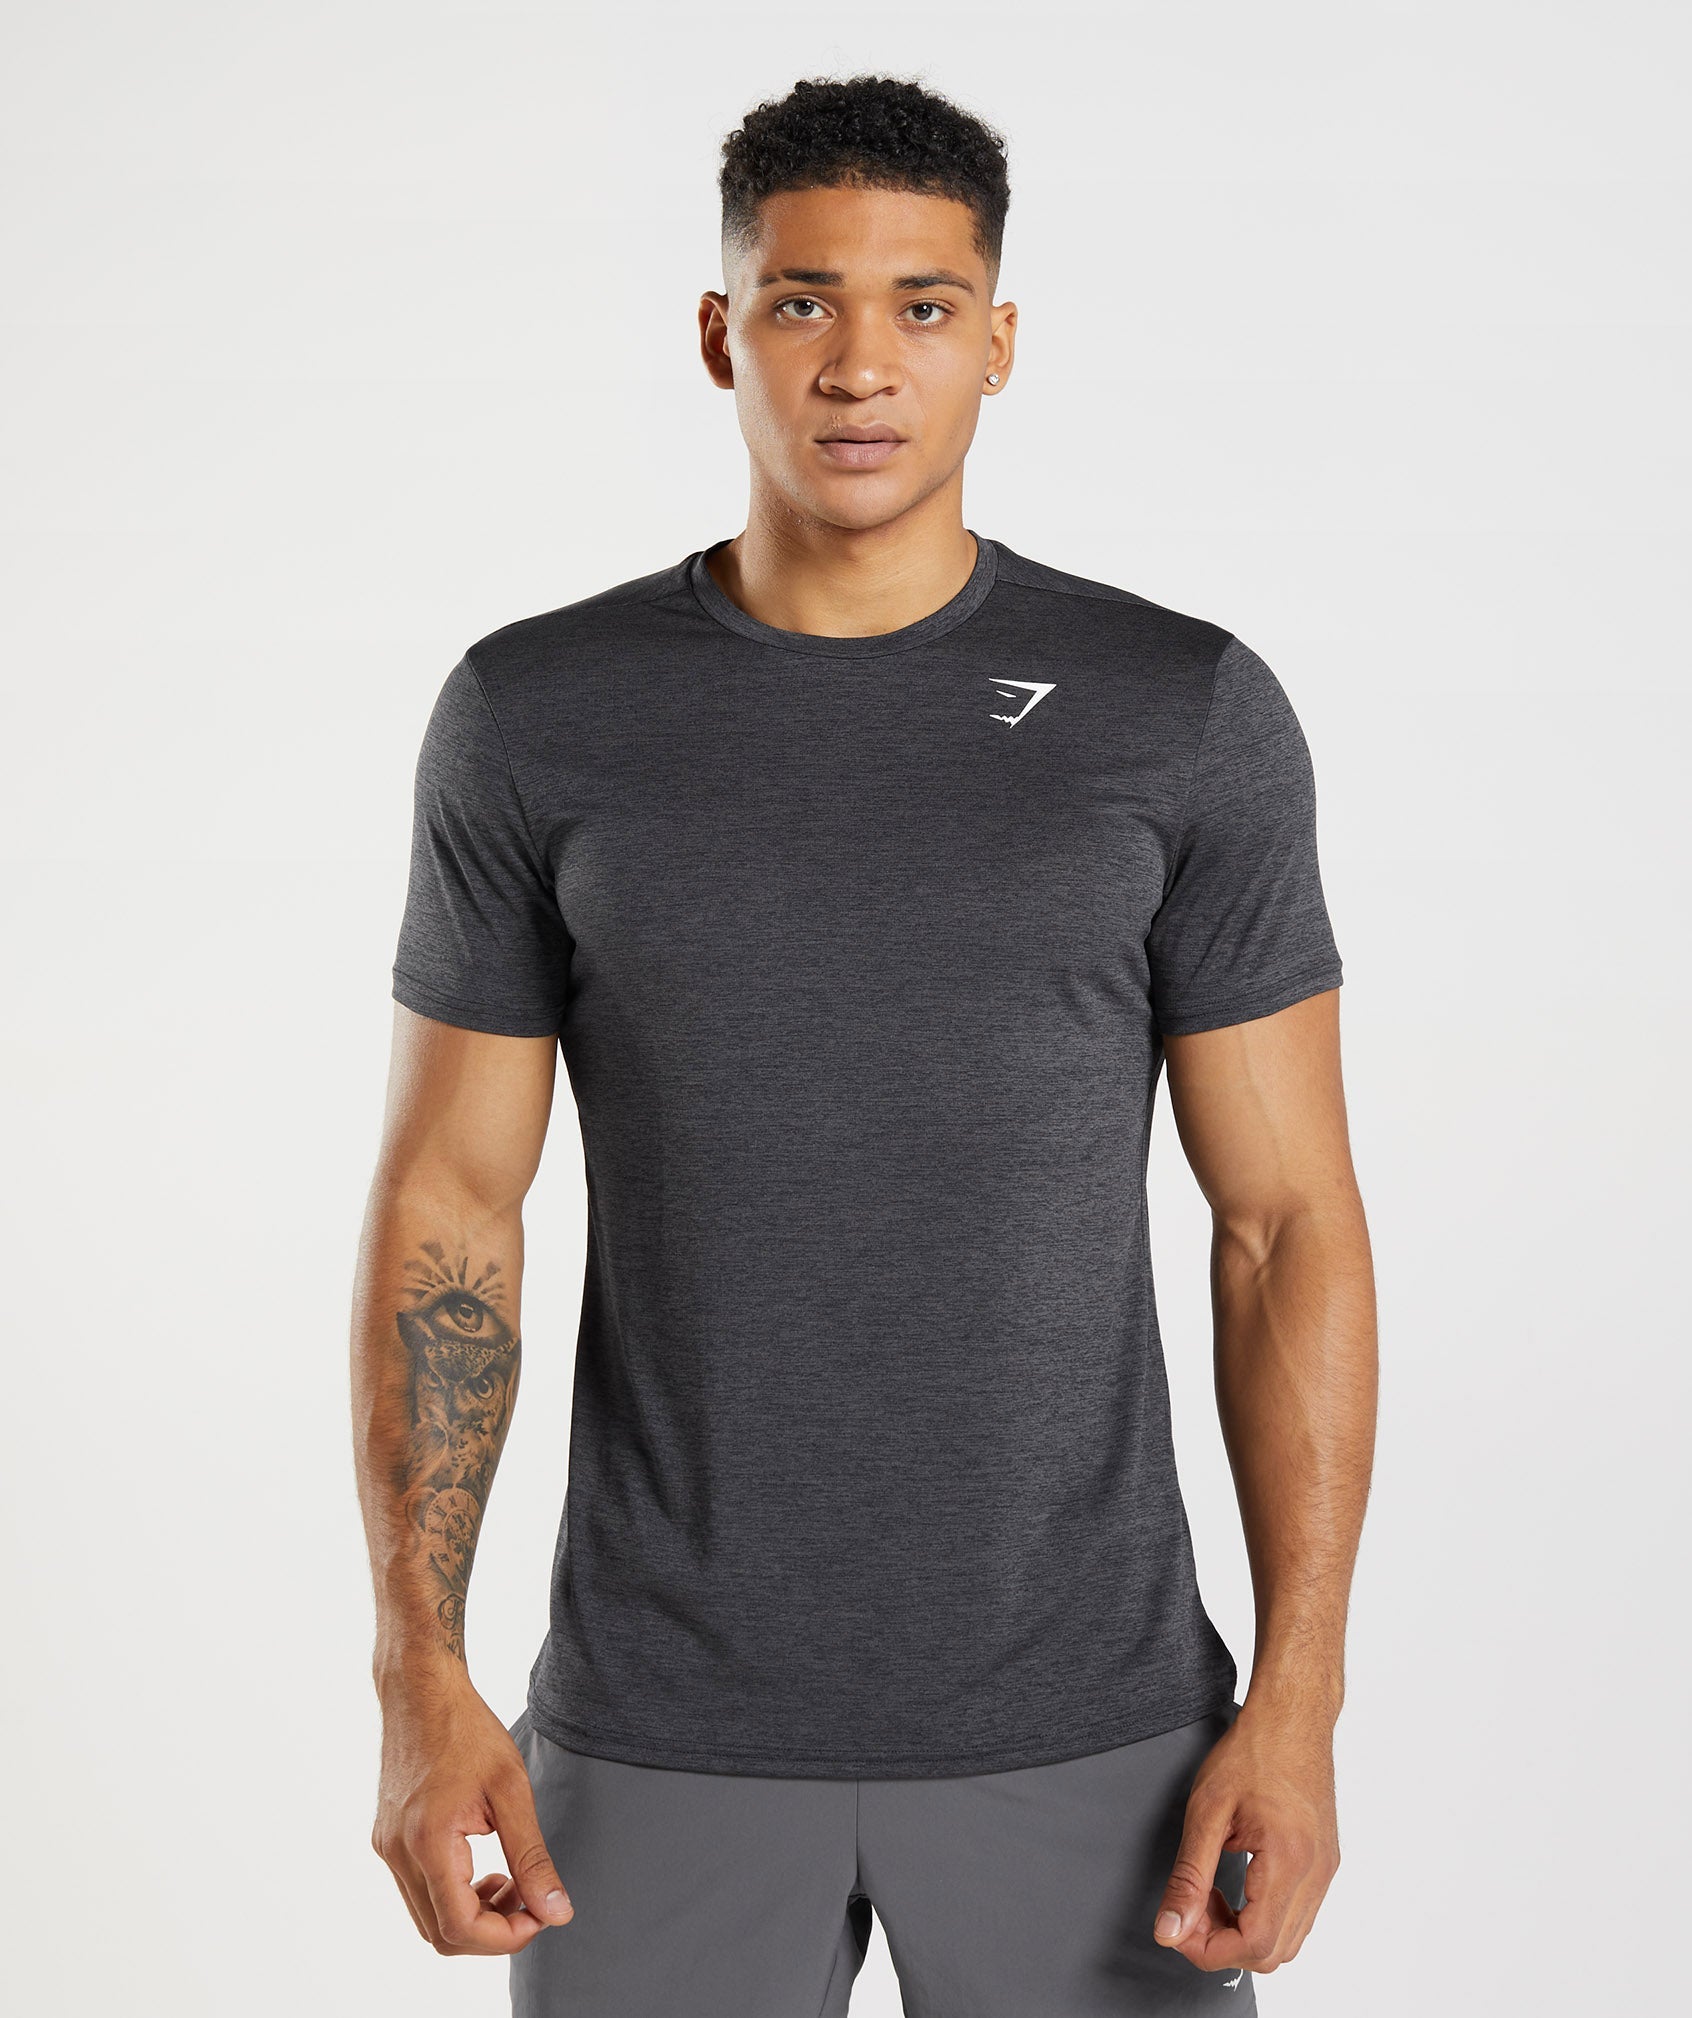 Gymshark on X: The Onyx. We give you a design that not only looks